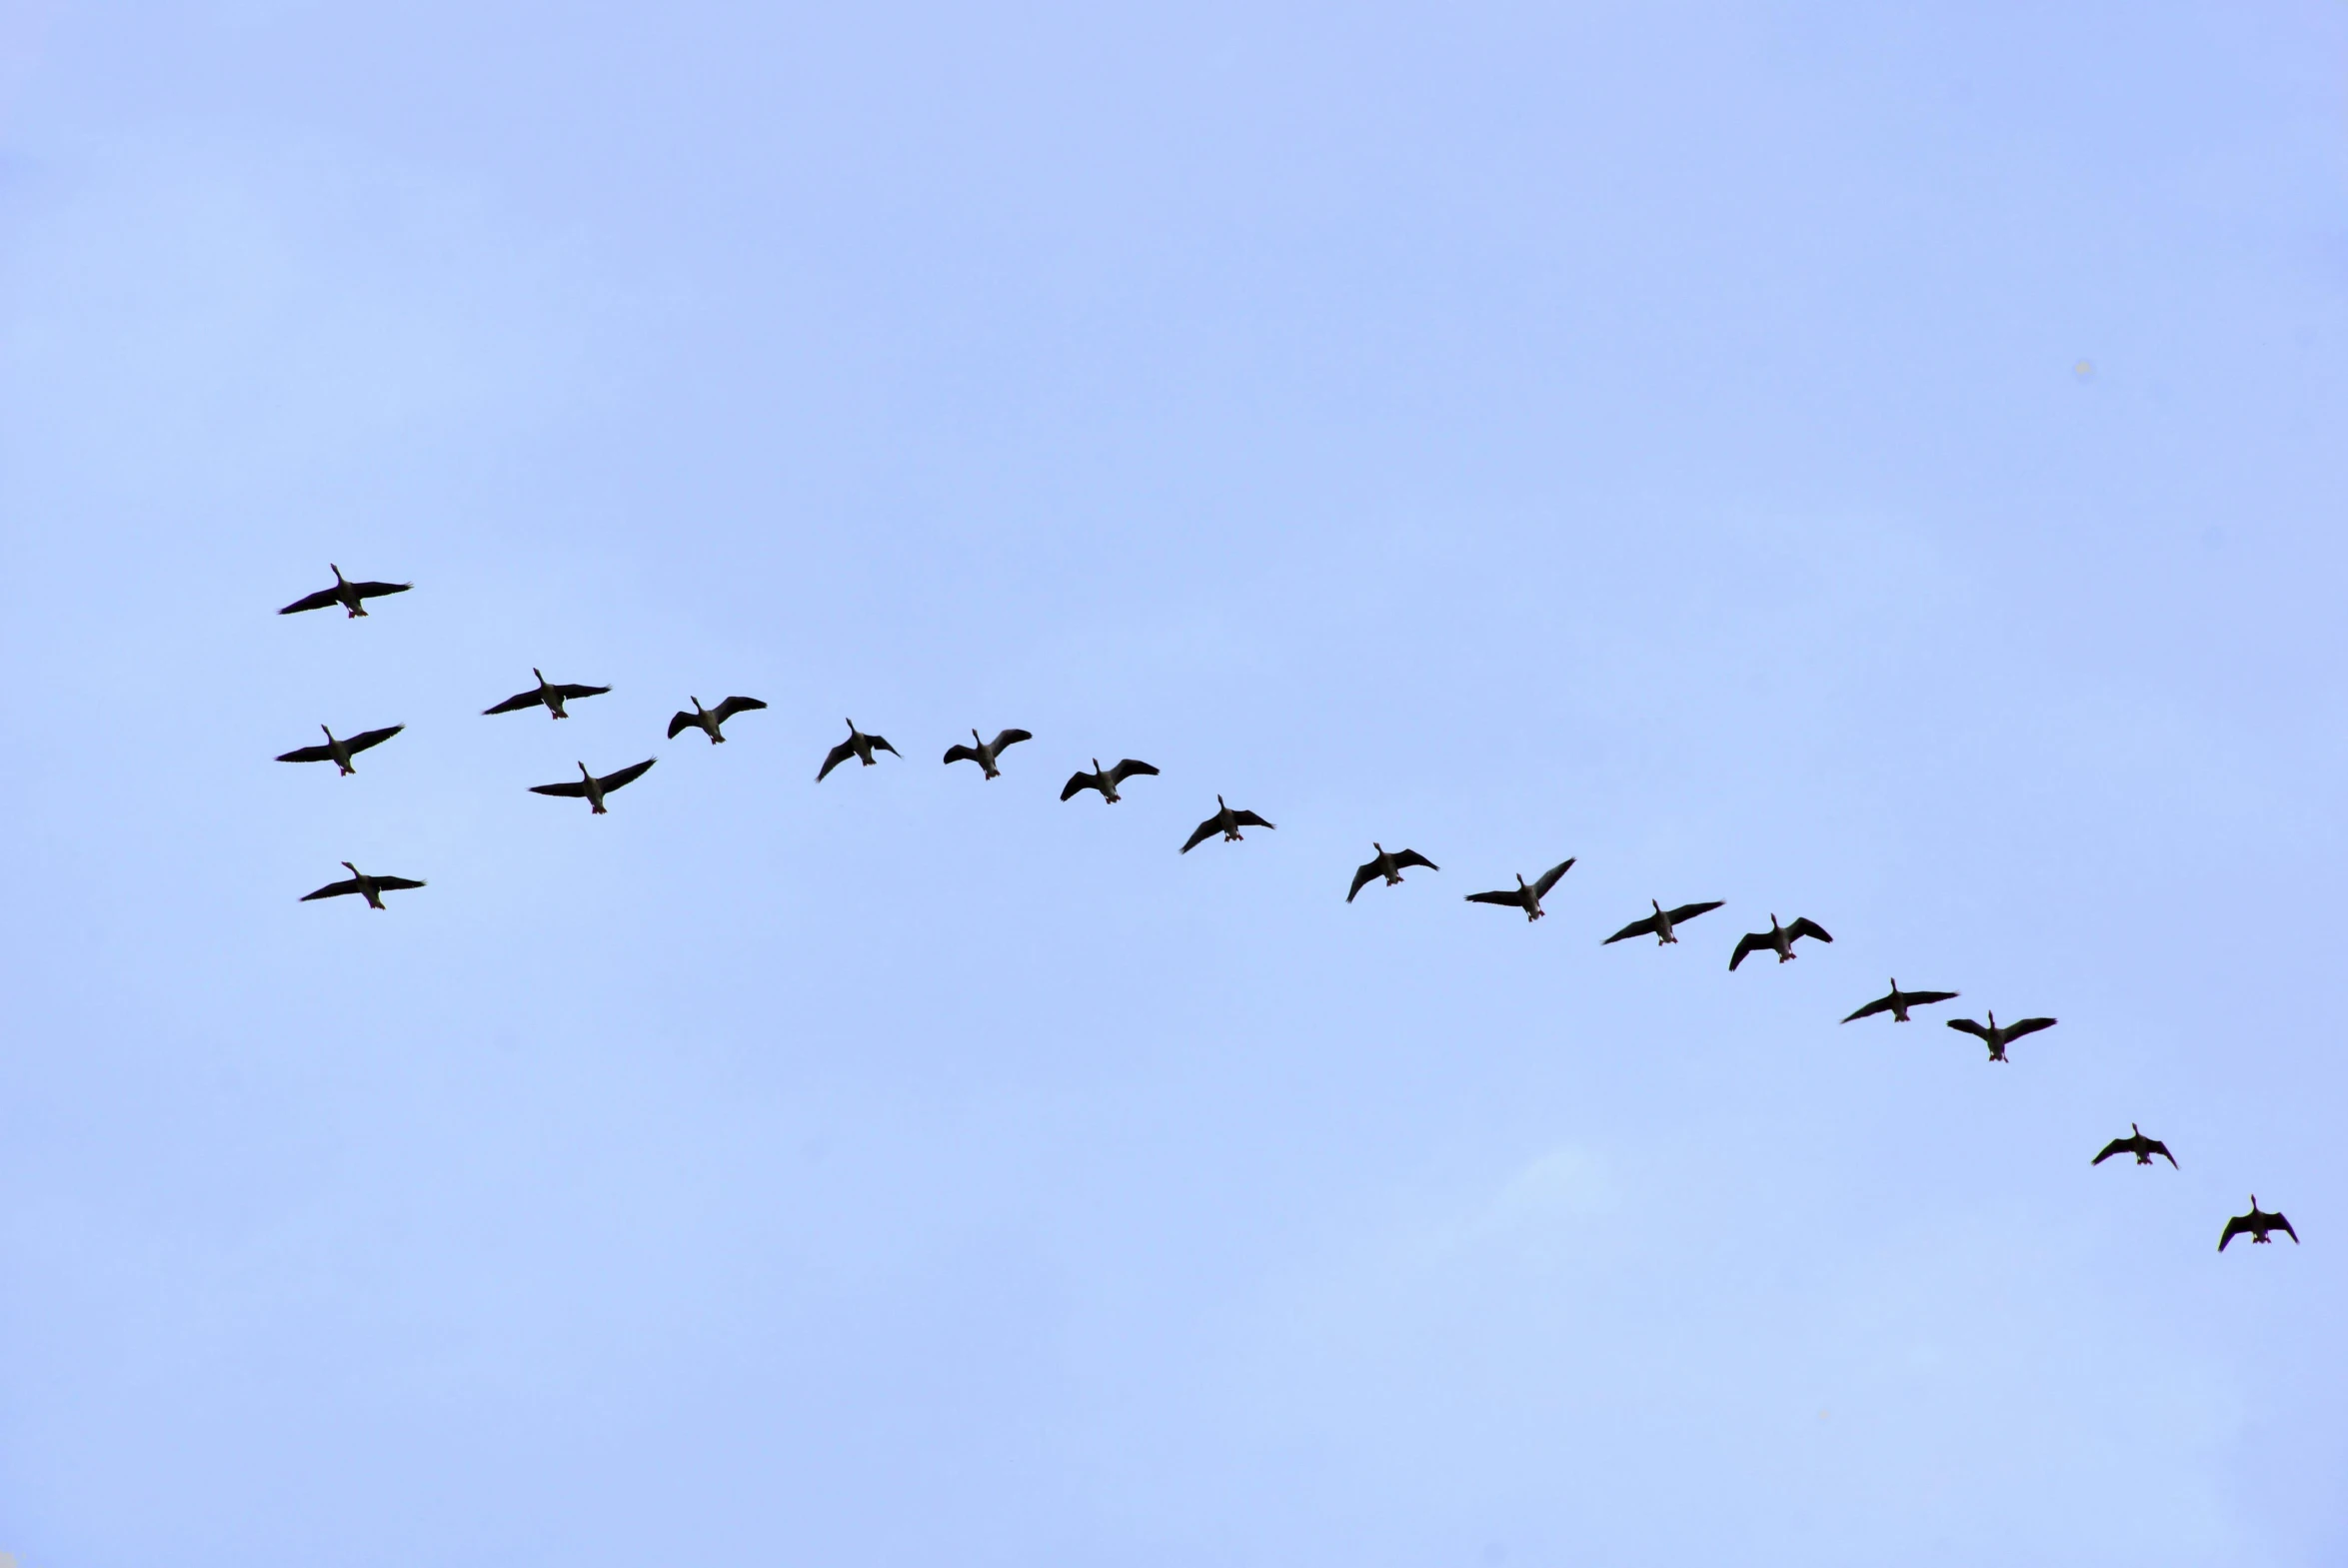 this is a long line of birds in the sky